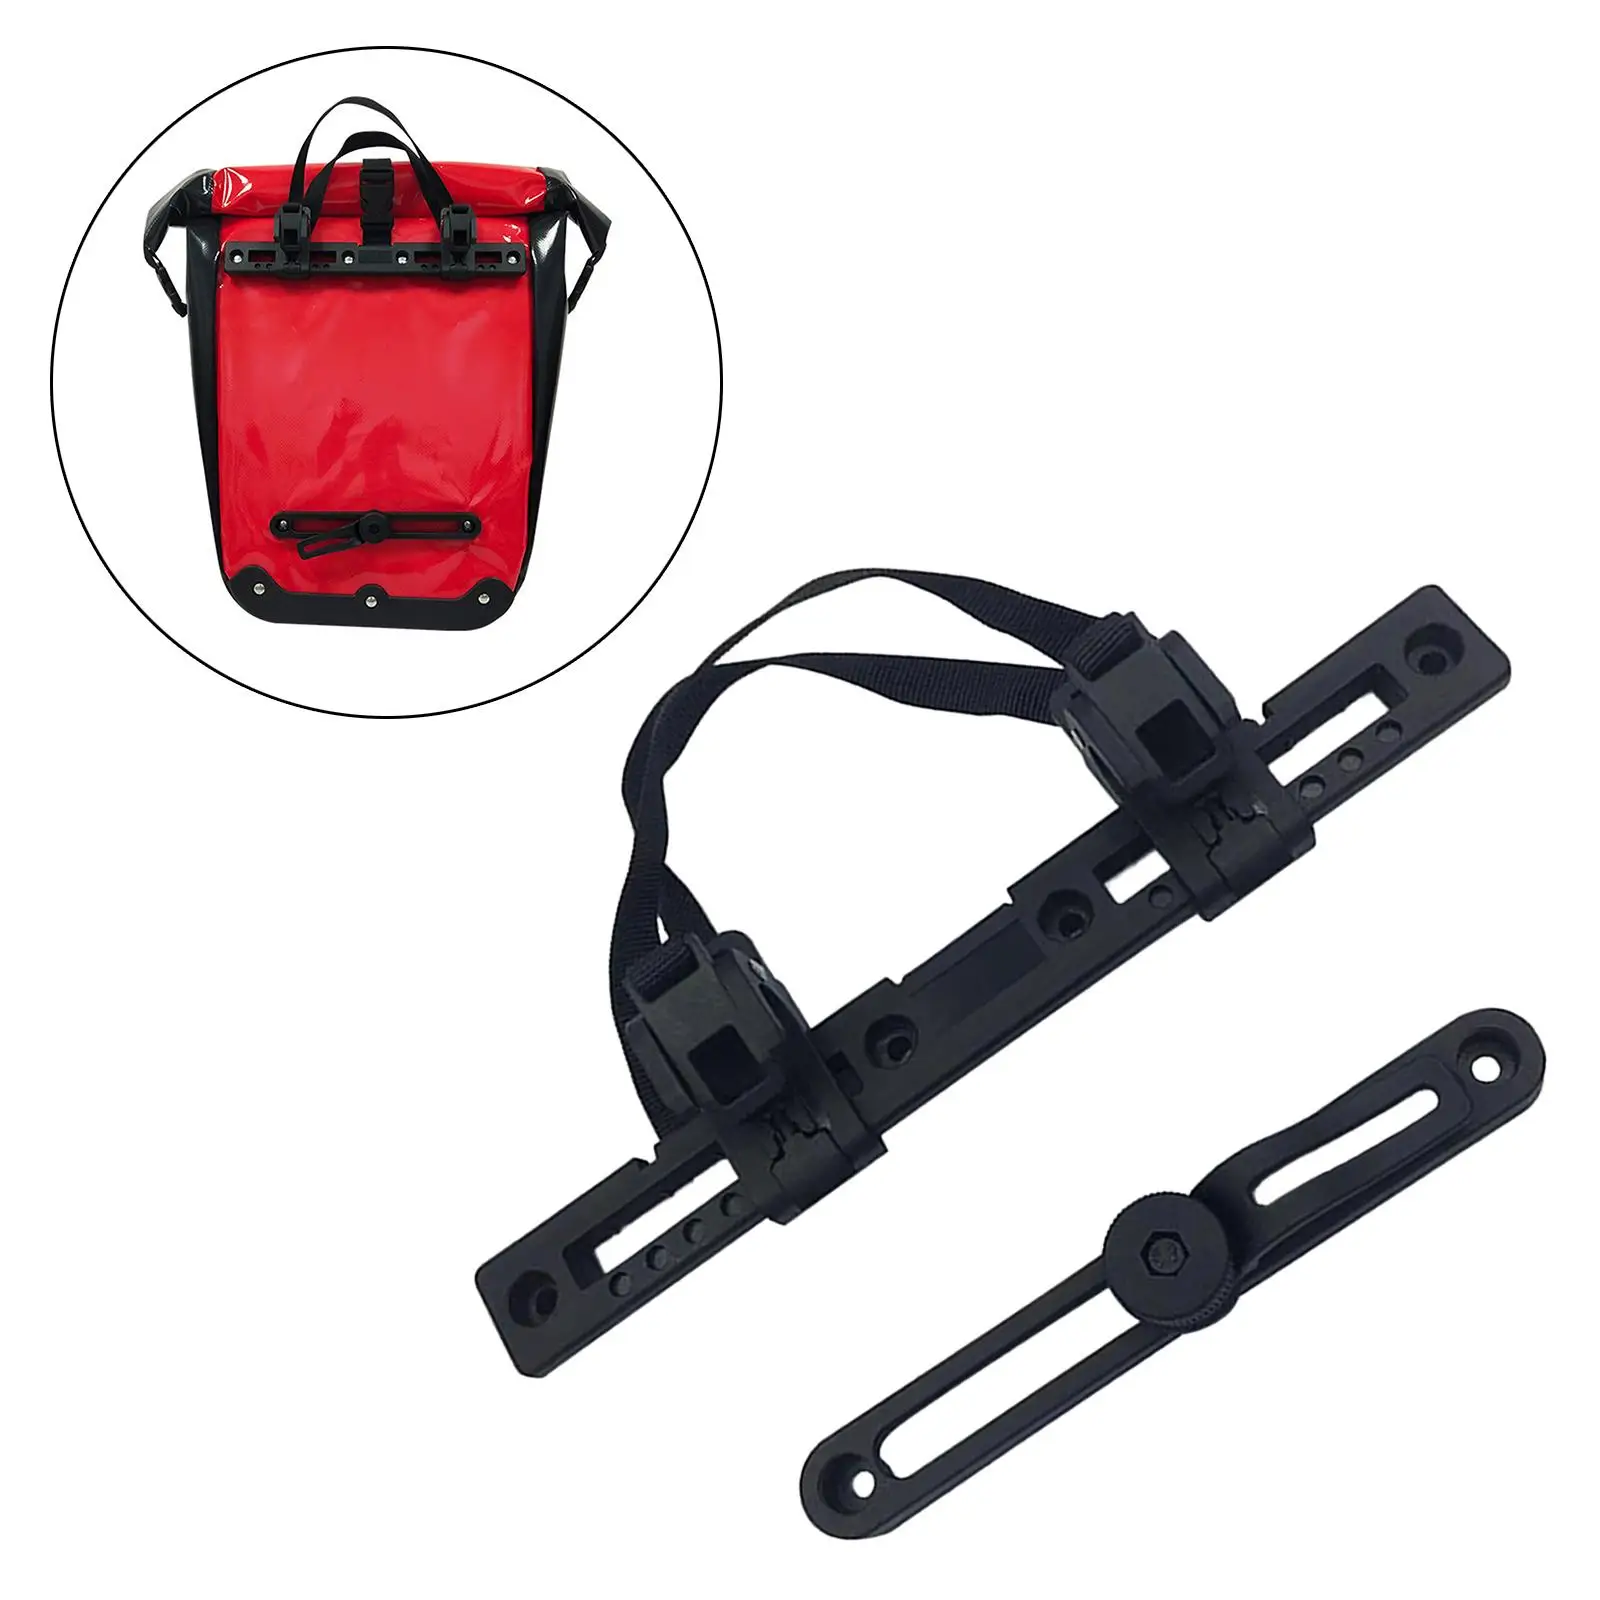 Adjustable Bicycle side bags Buckle Riding Equipment Bike Accessory